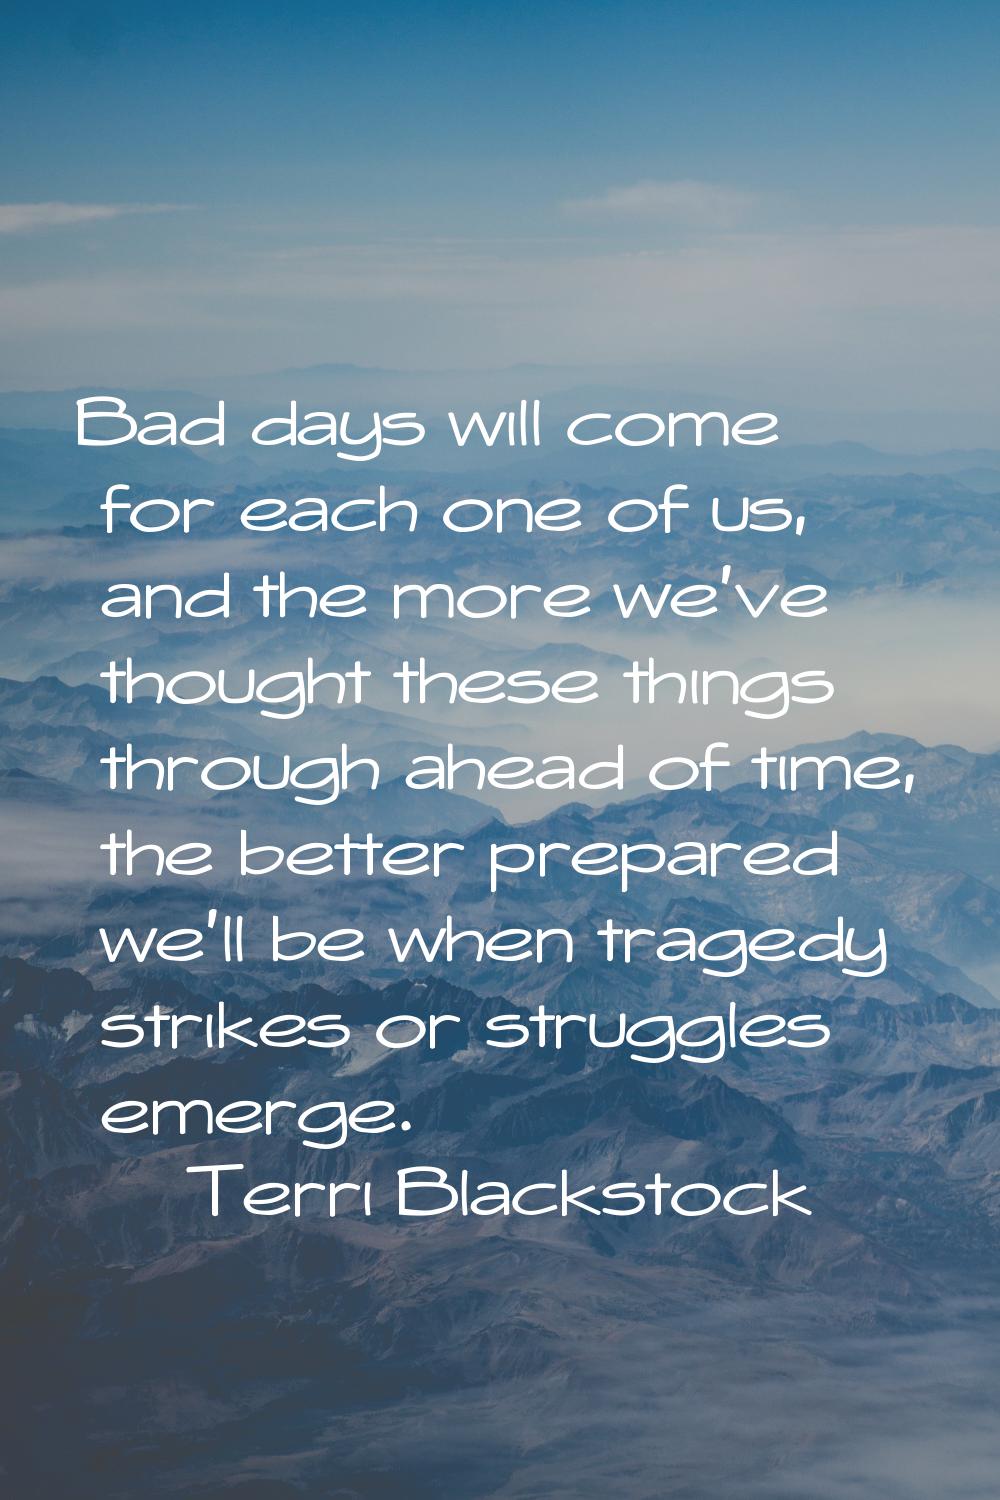 Bad days will come for each one of us, and the more we've thought these things through ahead of tim